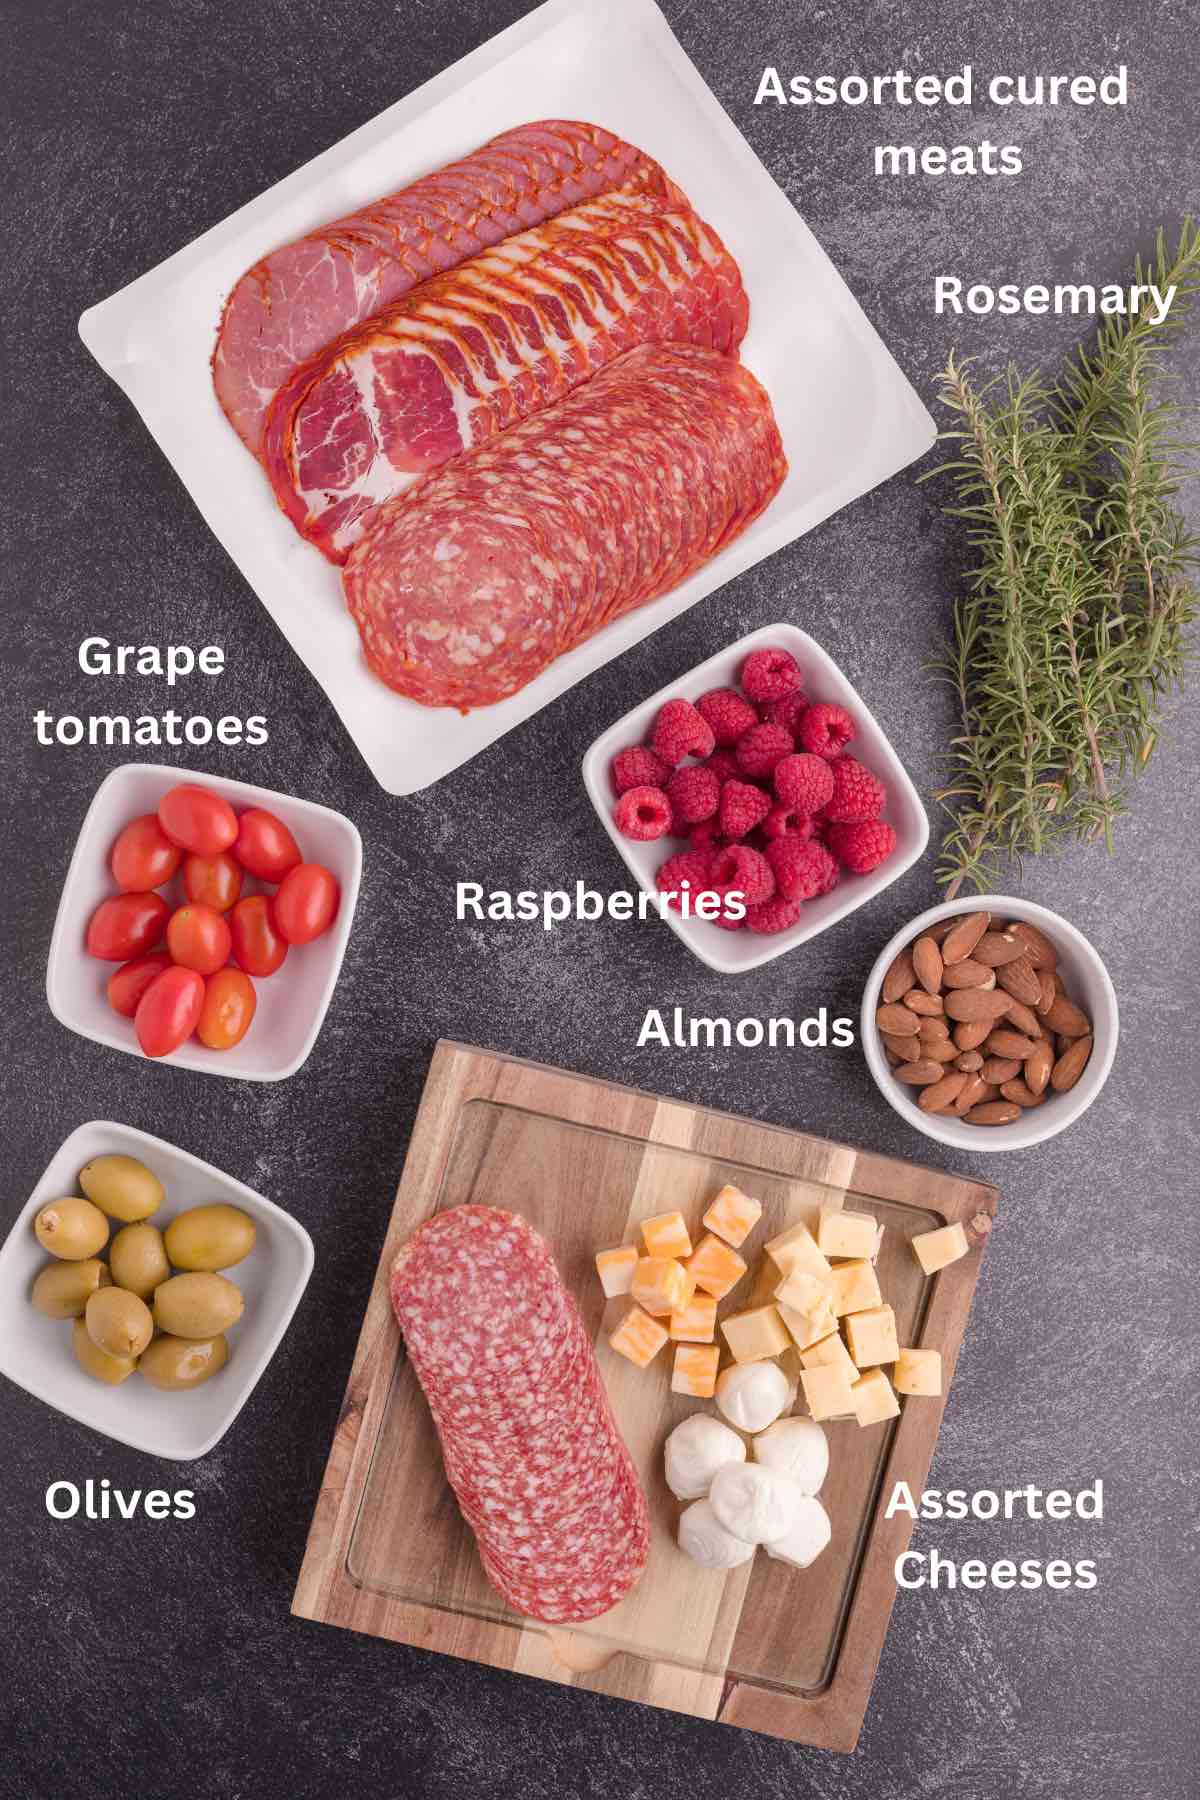 Ingredients for a charcuterie board include sliced cured meats, cheeses, and vegetables. 